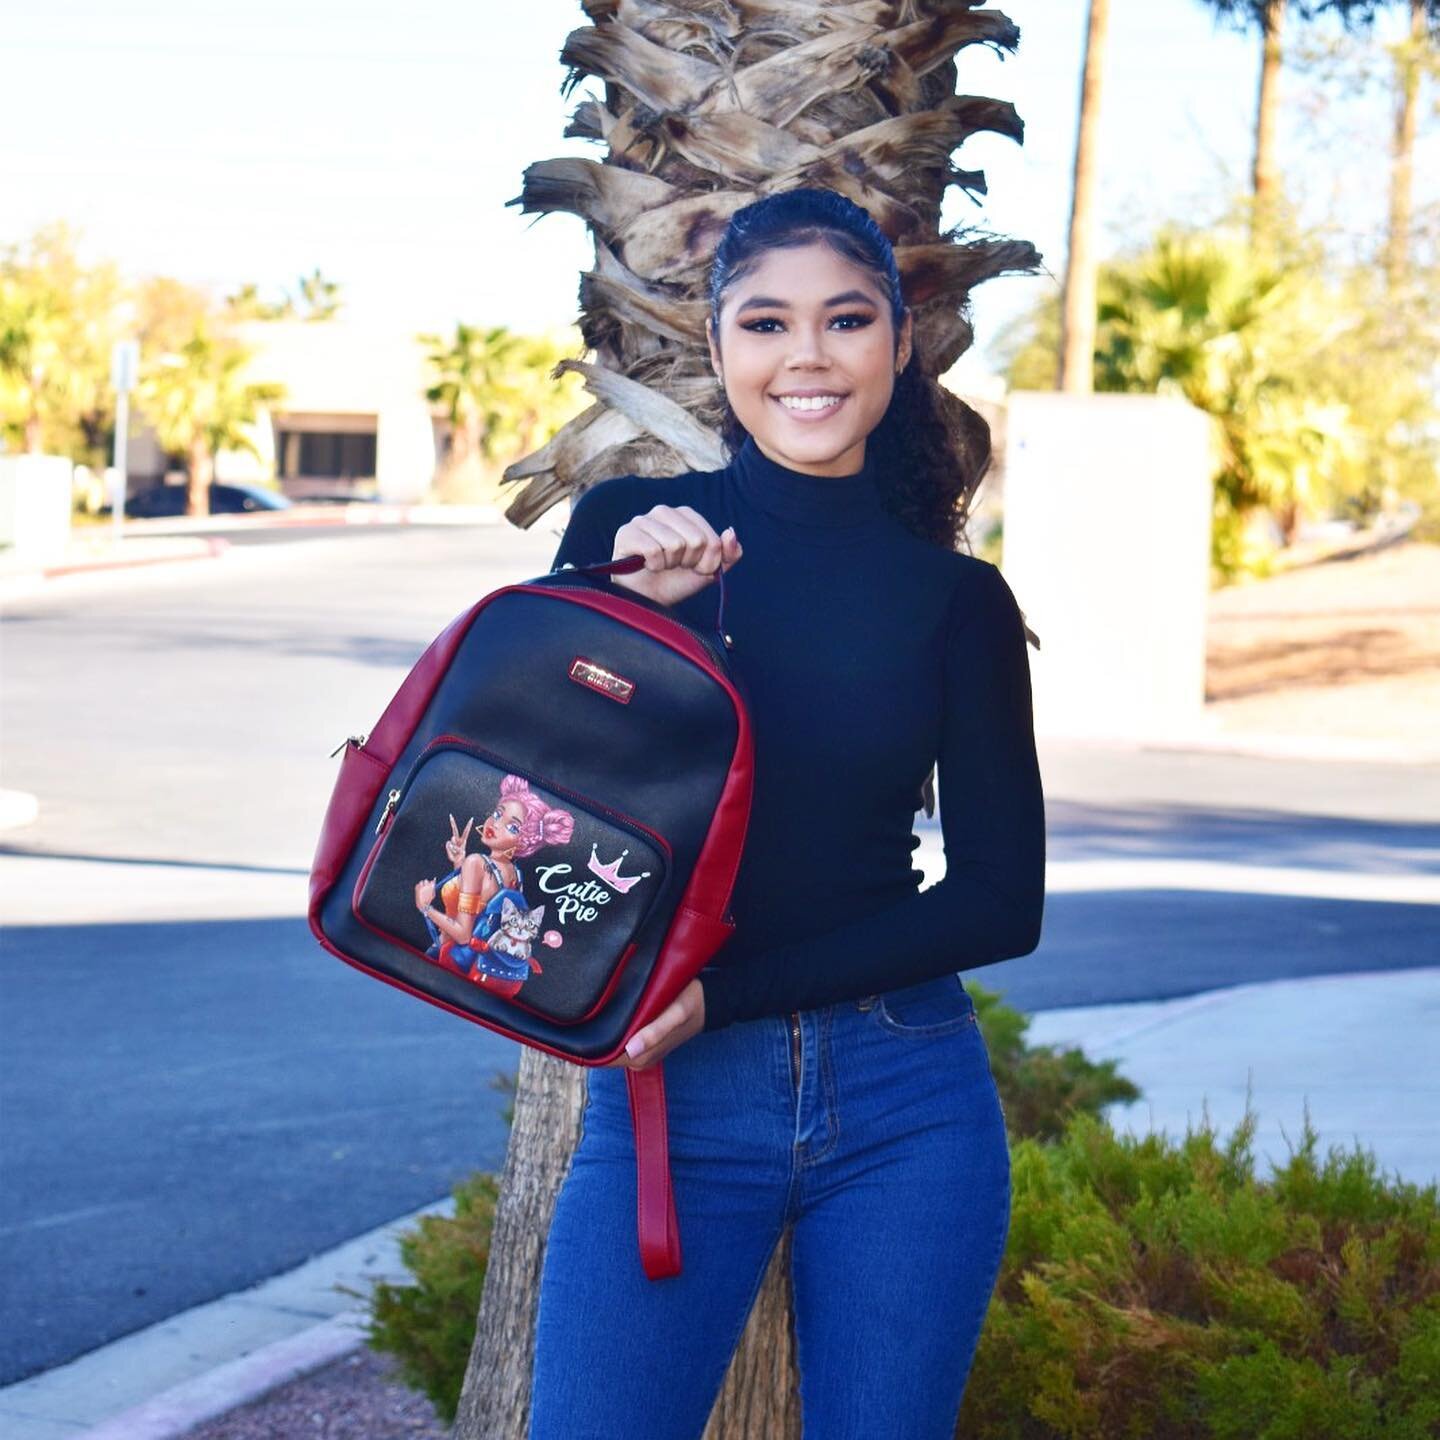 Get a signature look of casual sophistication with the well-structured Nikky Backpack🥰 Visit our official website nicoleleeusa.com/nl-stores to find your nearest distributor to shop our new arrivals! To shop directly visit nikkybag.com/new-arrivals 